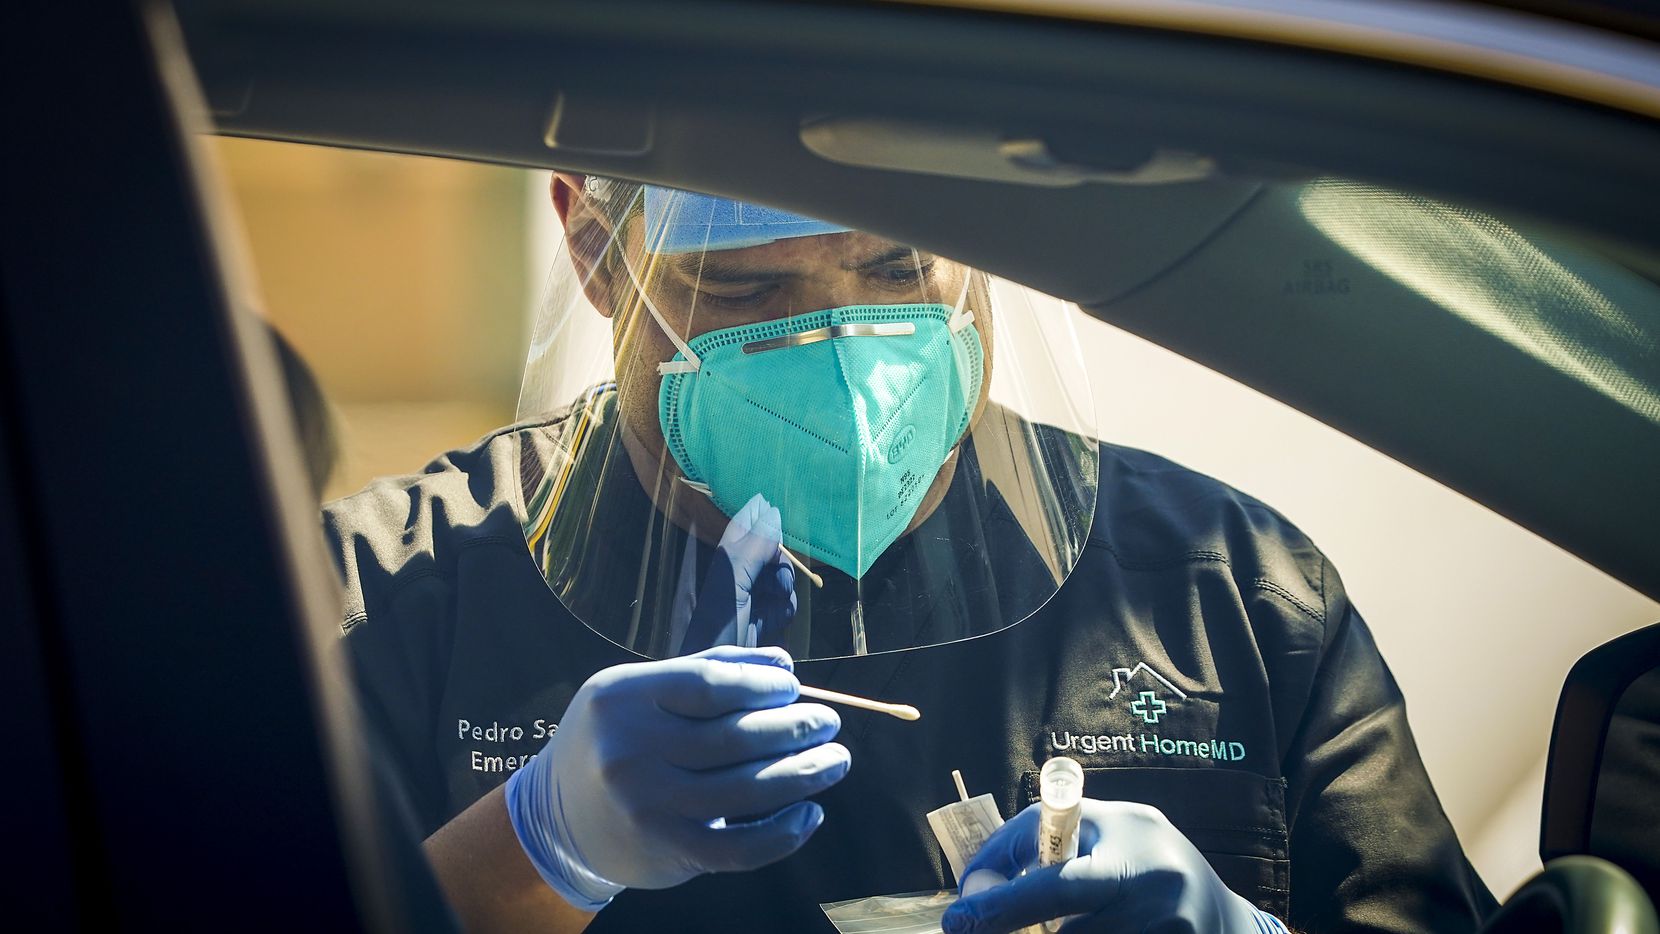 Dr. Pedro Salcido, of Urgent HomeMD, conducts a COVID-19 drive-thru test in a downtown...